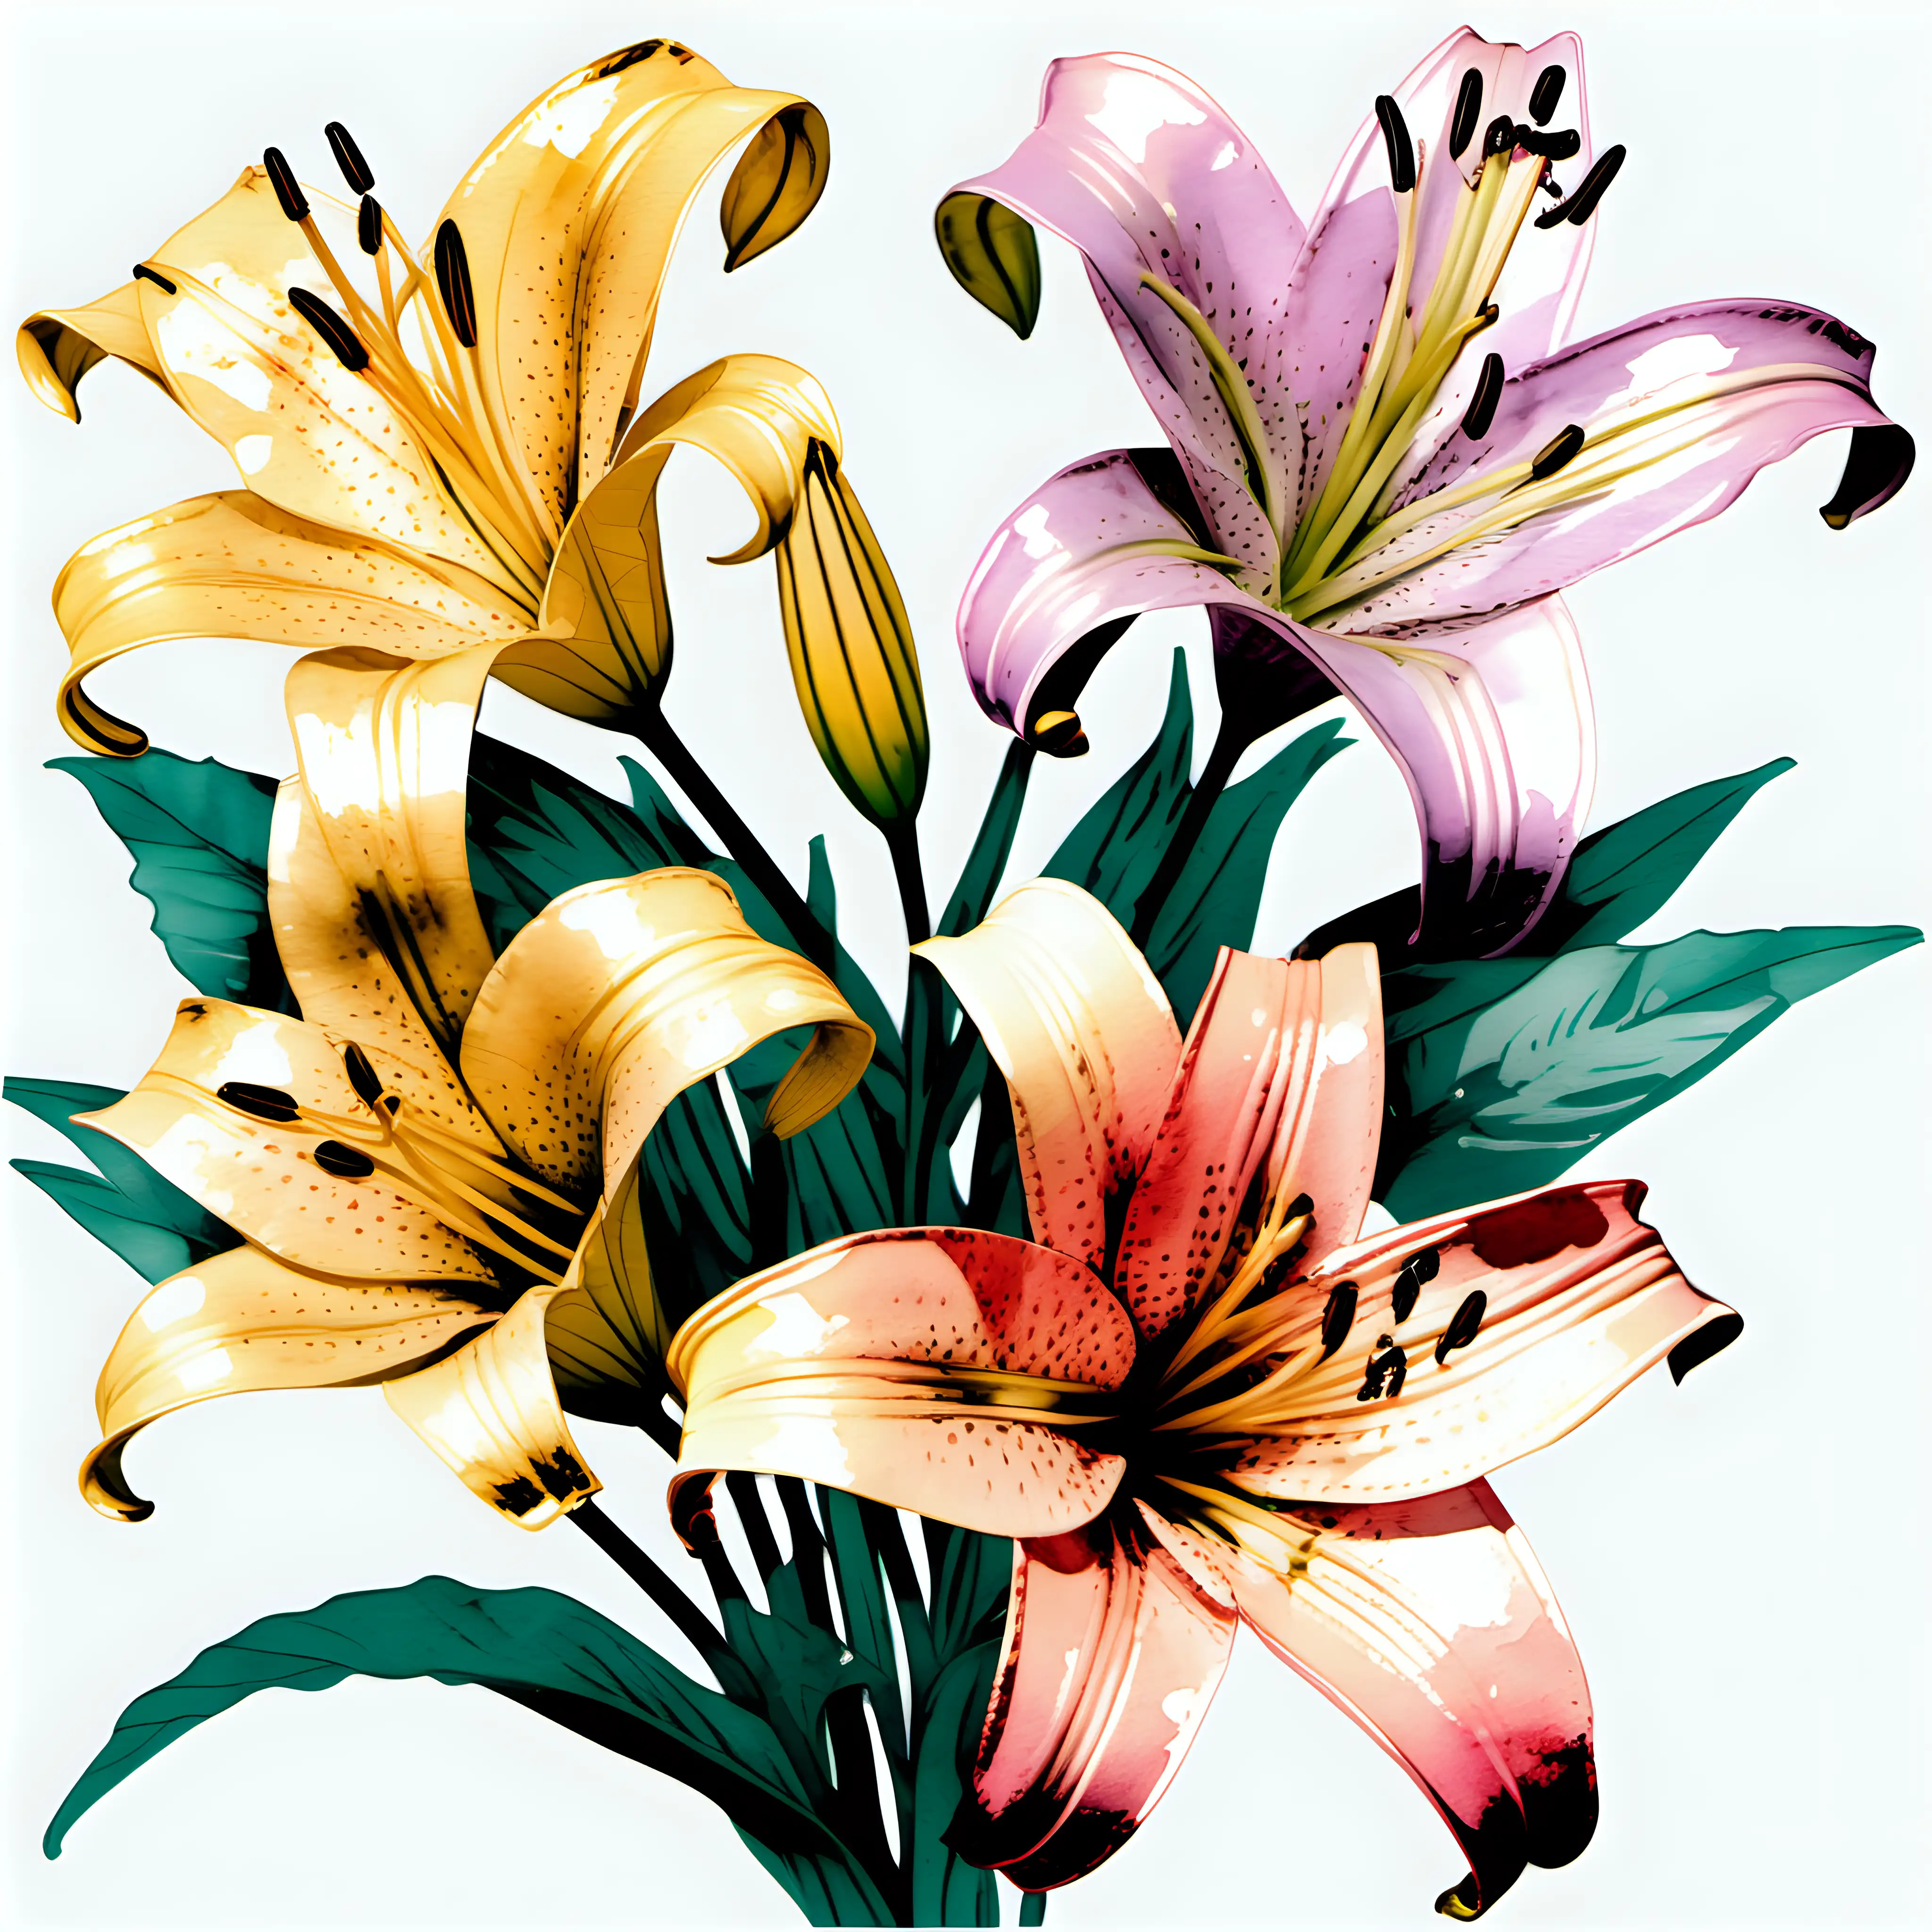 Pastel Watercolor Lily Flowers Clipart Inspired by Andy Warhol